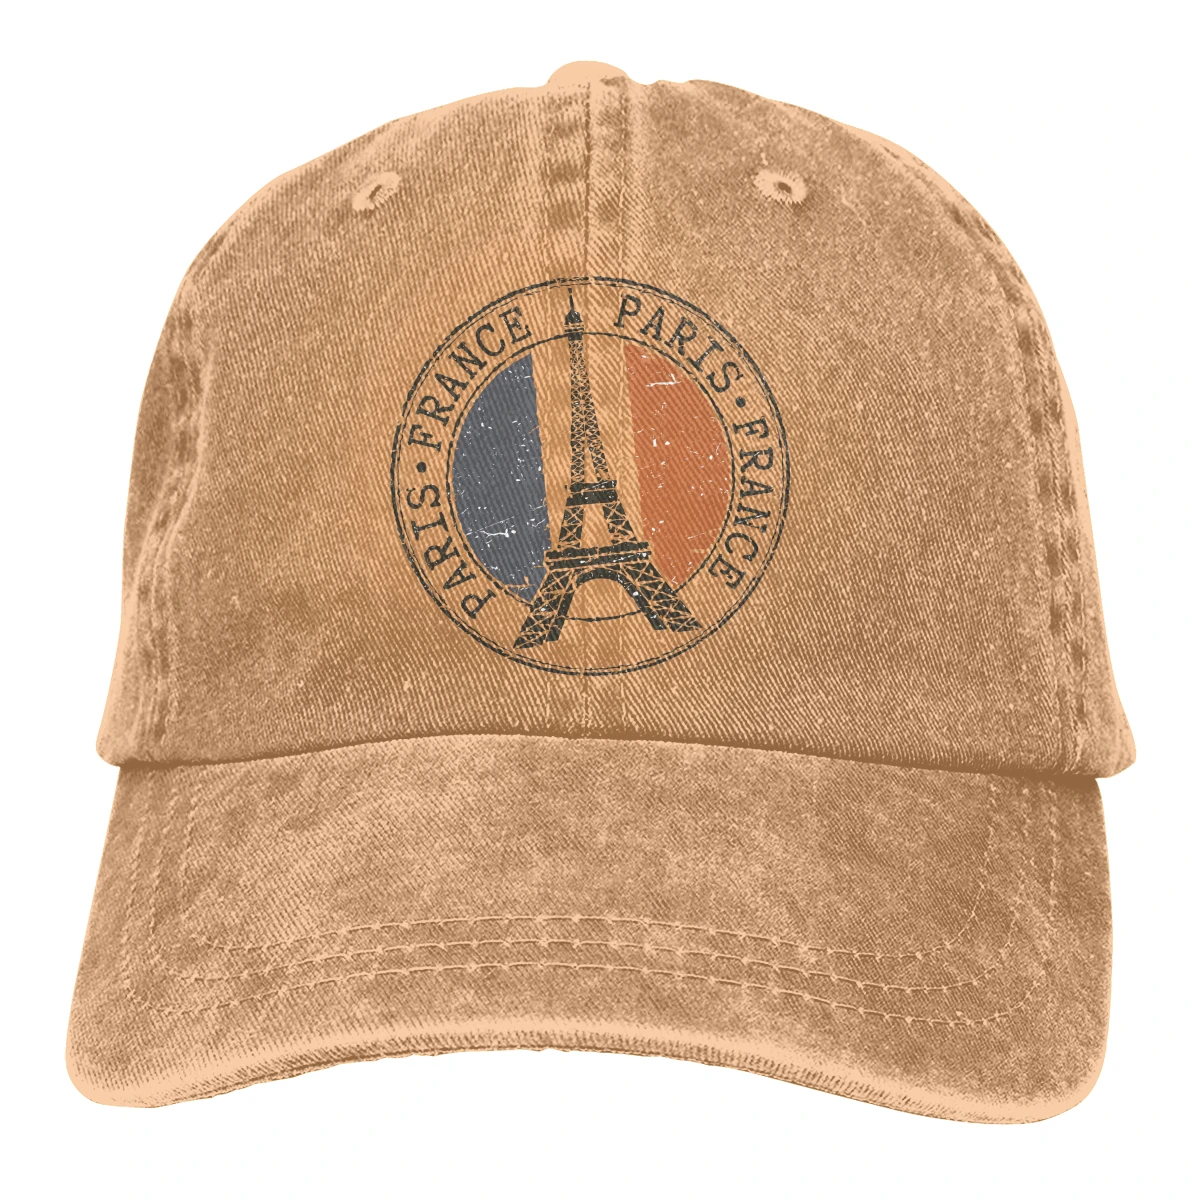 Vintage Unisex Adjustable Trucker Cap for Adult Paris France With Eiffel Tower And French Flag Stamp